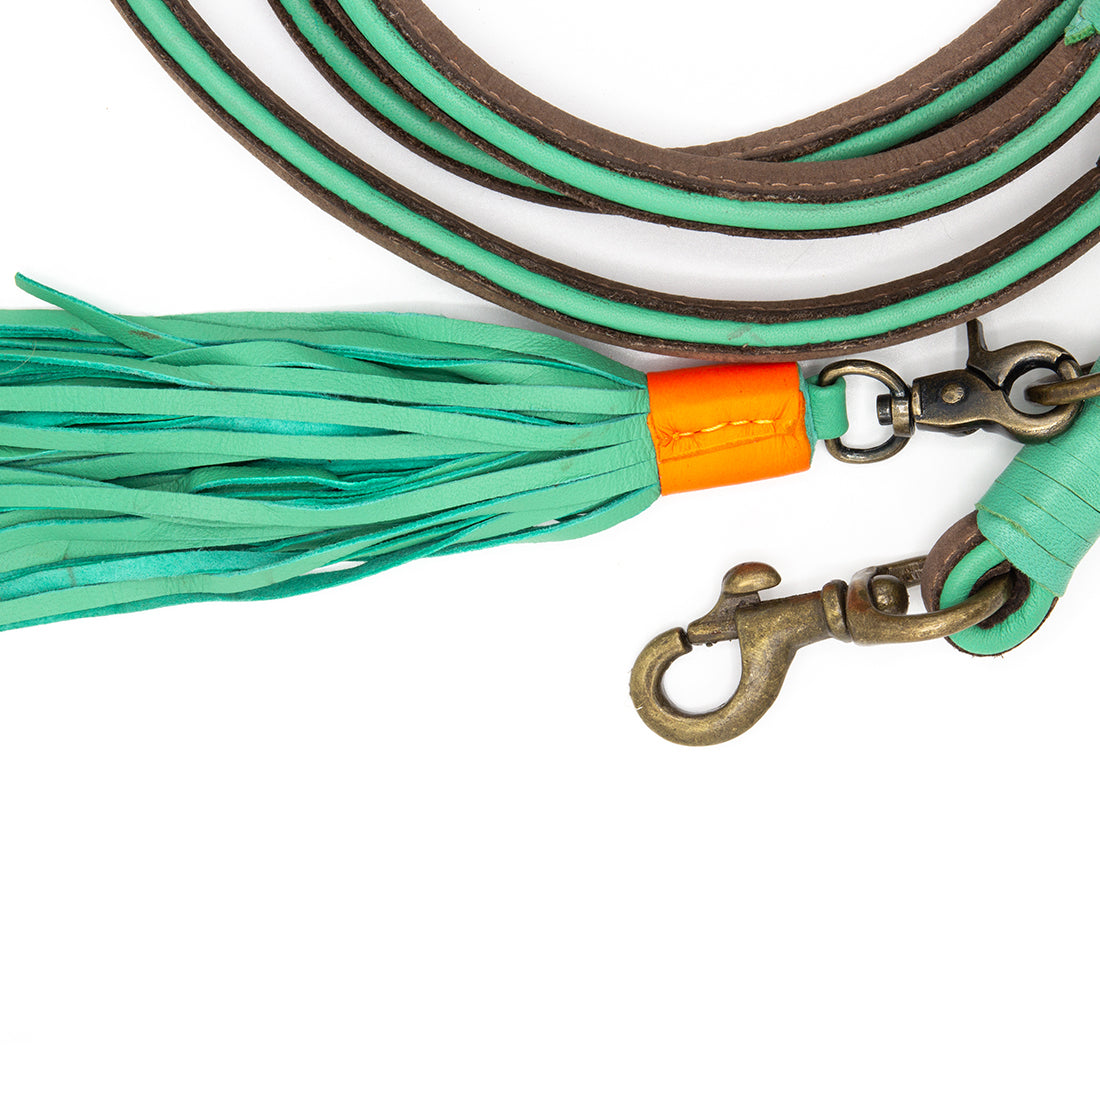 Picture of a brown/turquoise leather leash and the details Brand: Dog with a Mission